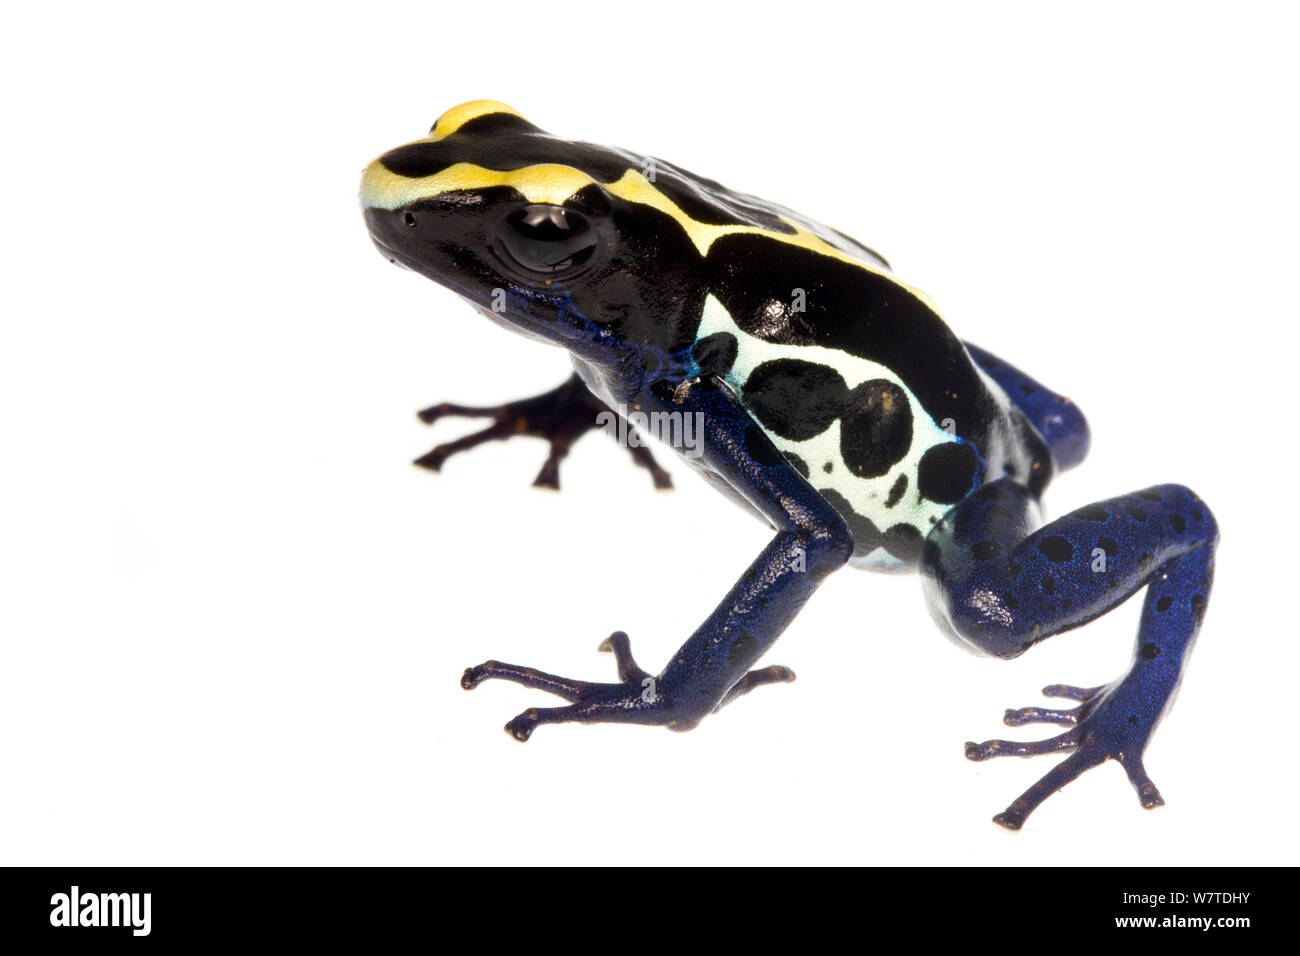 Dyeing Poison Frog (Dendrobates tinctorius) Grand Matoury, French Guiana. Meetyourneighbours.net project Stock Photo